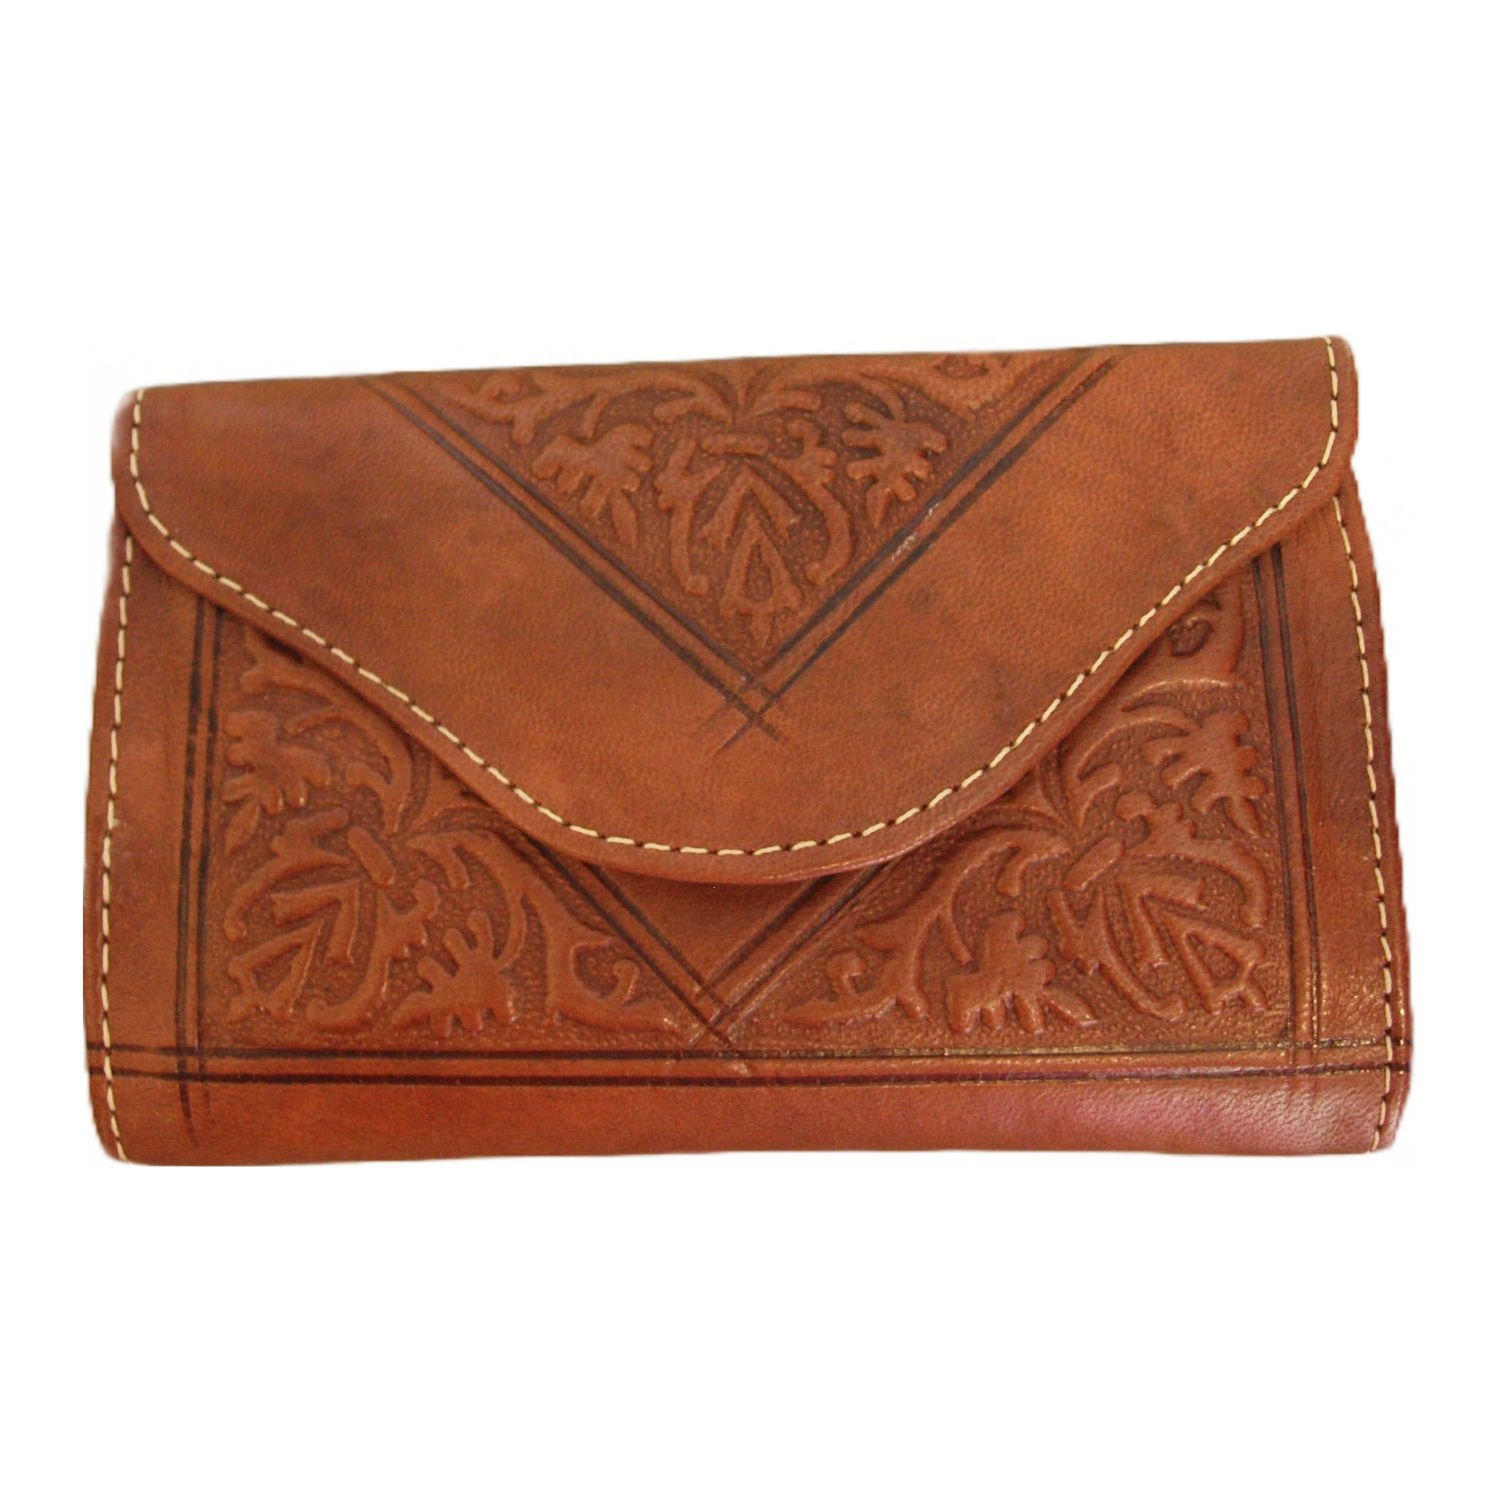 Small Leather Tri-Fold Purse Dark Brown on White Background